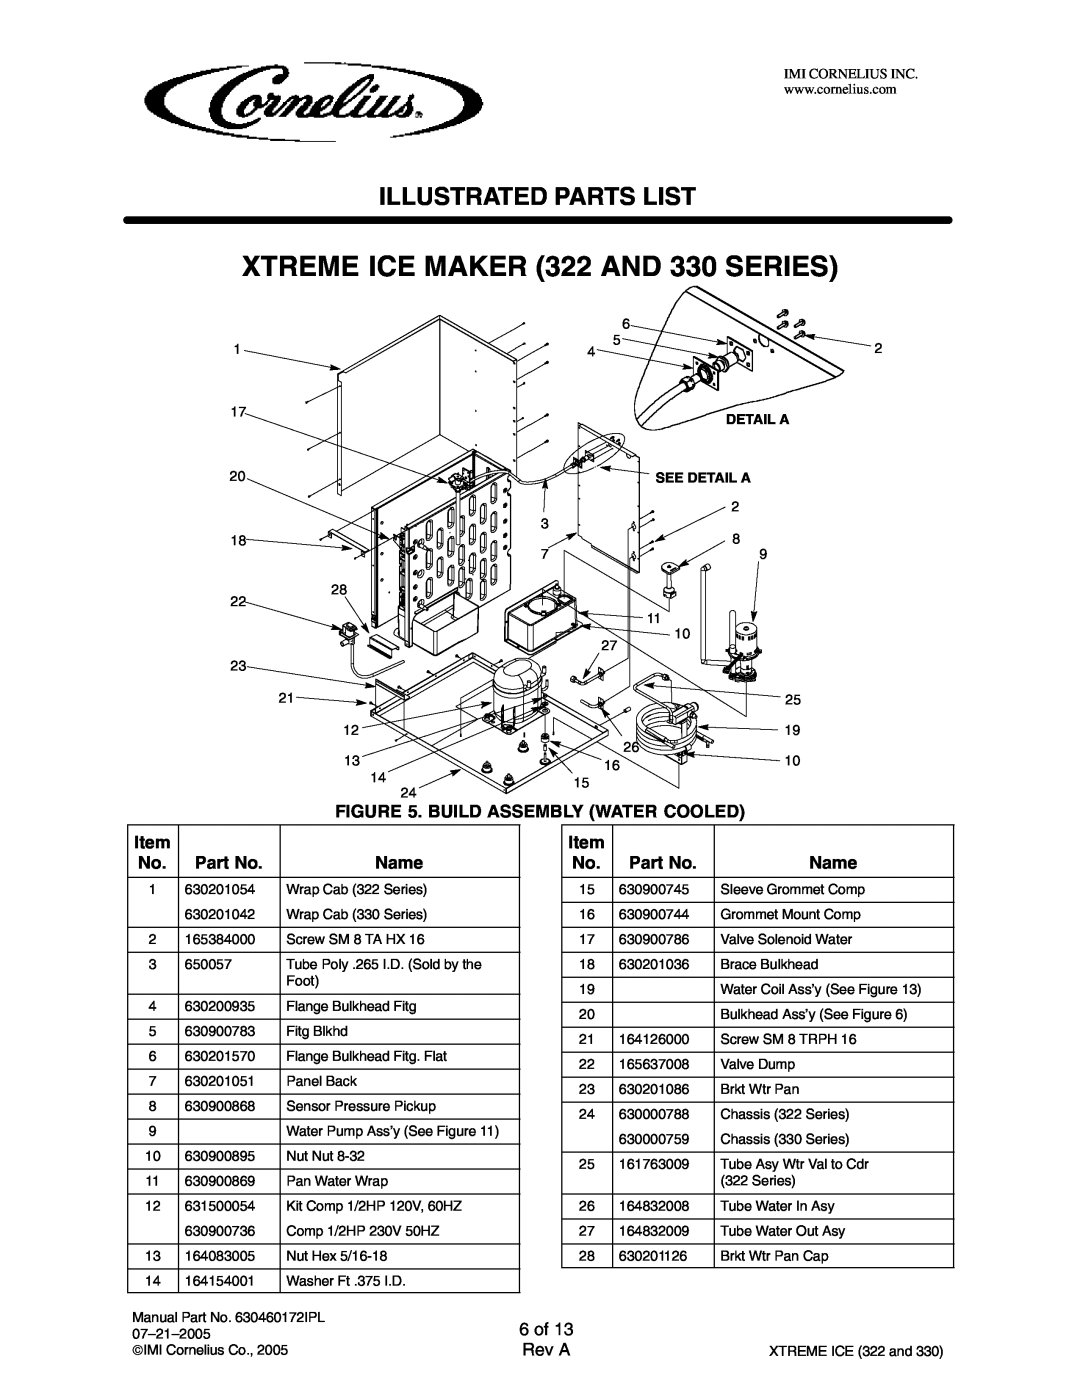 Cornelius 330 Series, 631803001 6 of, XTREME ICE MAKER 322 AND 330 SERIES, Illustrated Parts List, Rev A, See Detail A 